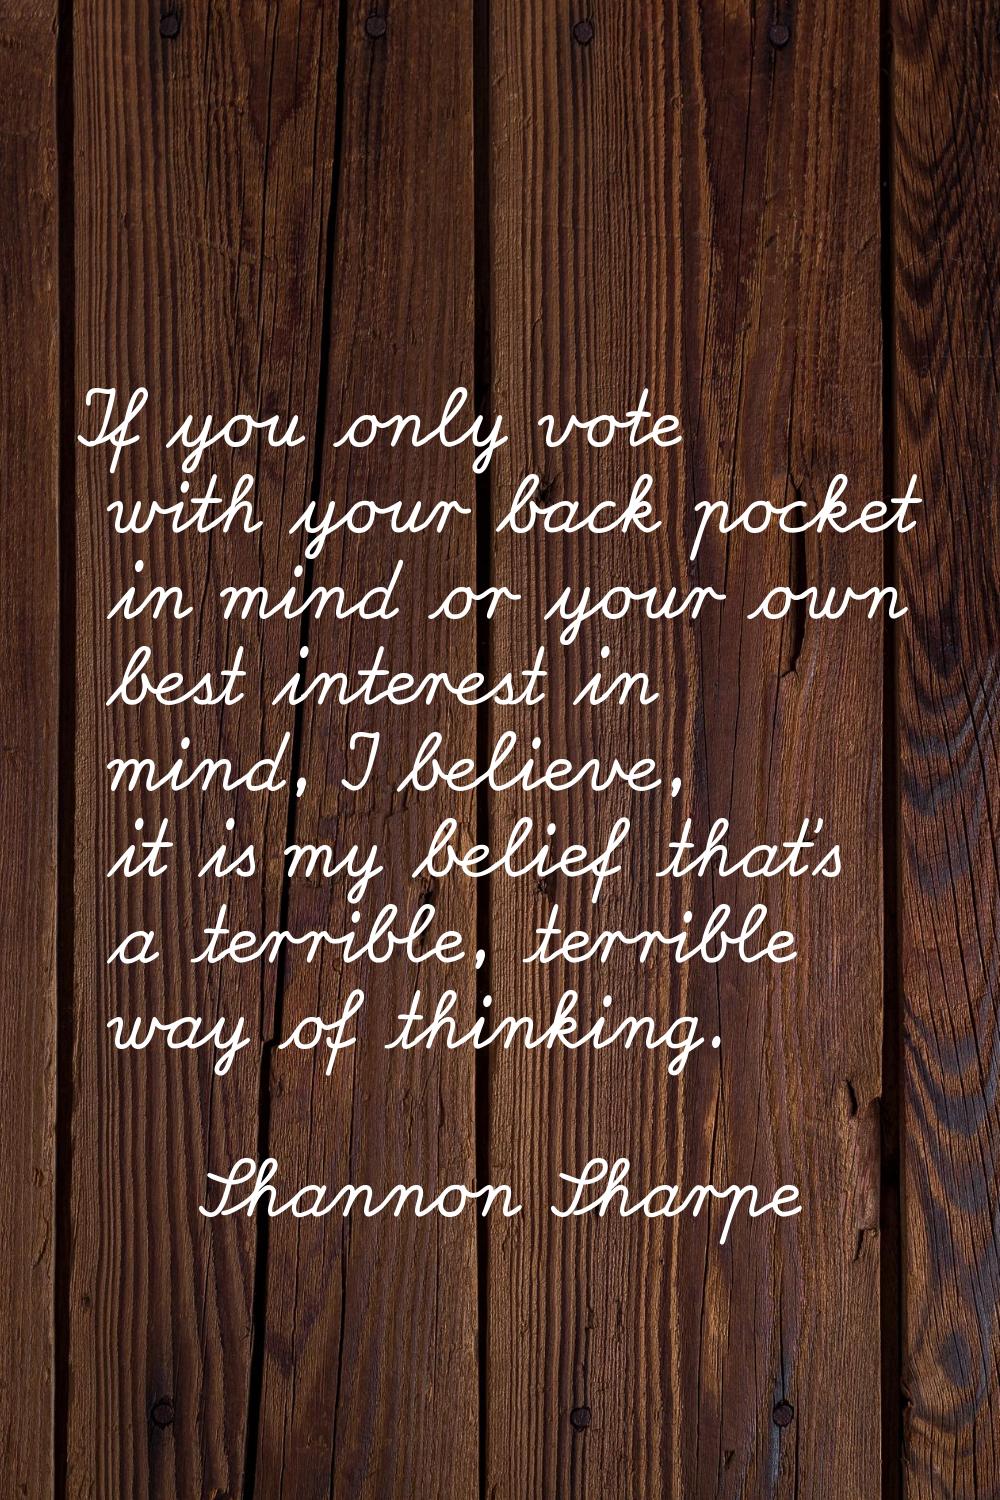 If you only vote with your back pocket in mind or your own best interest in mind, I believe, it is 